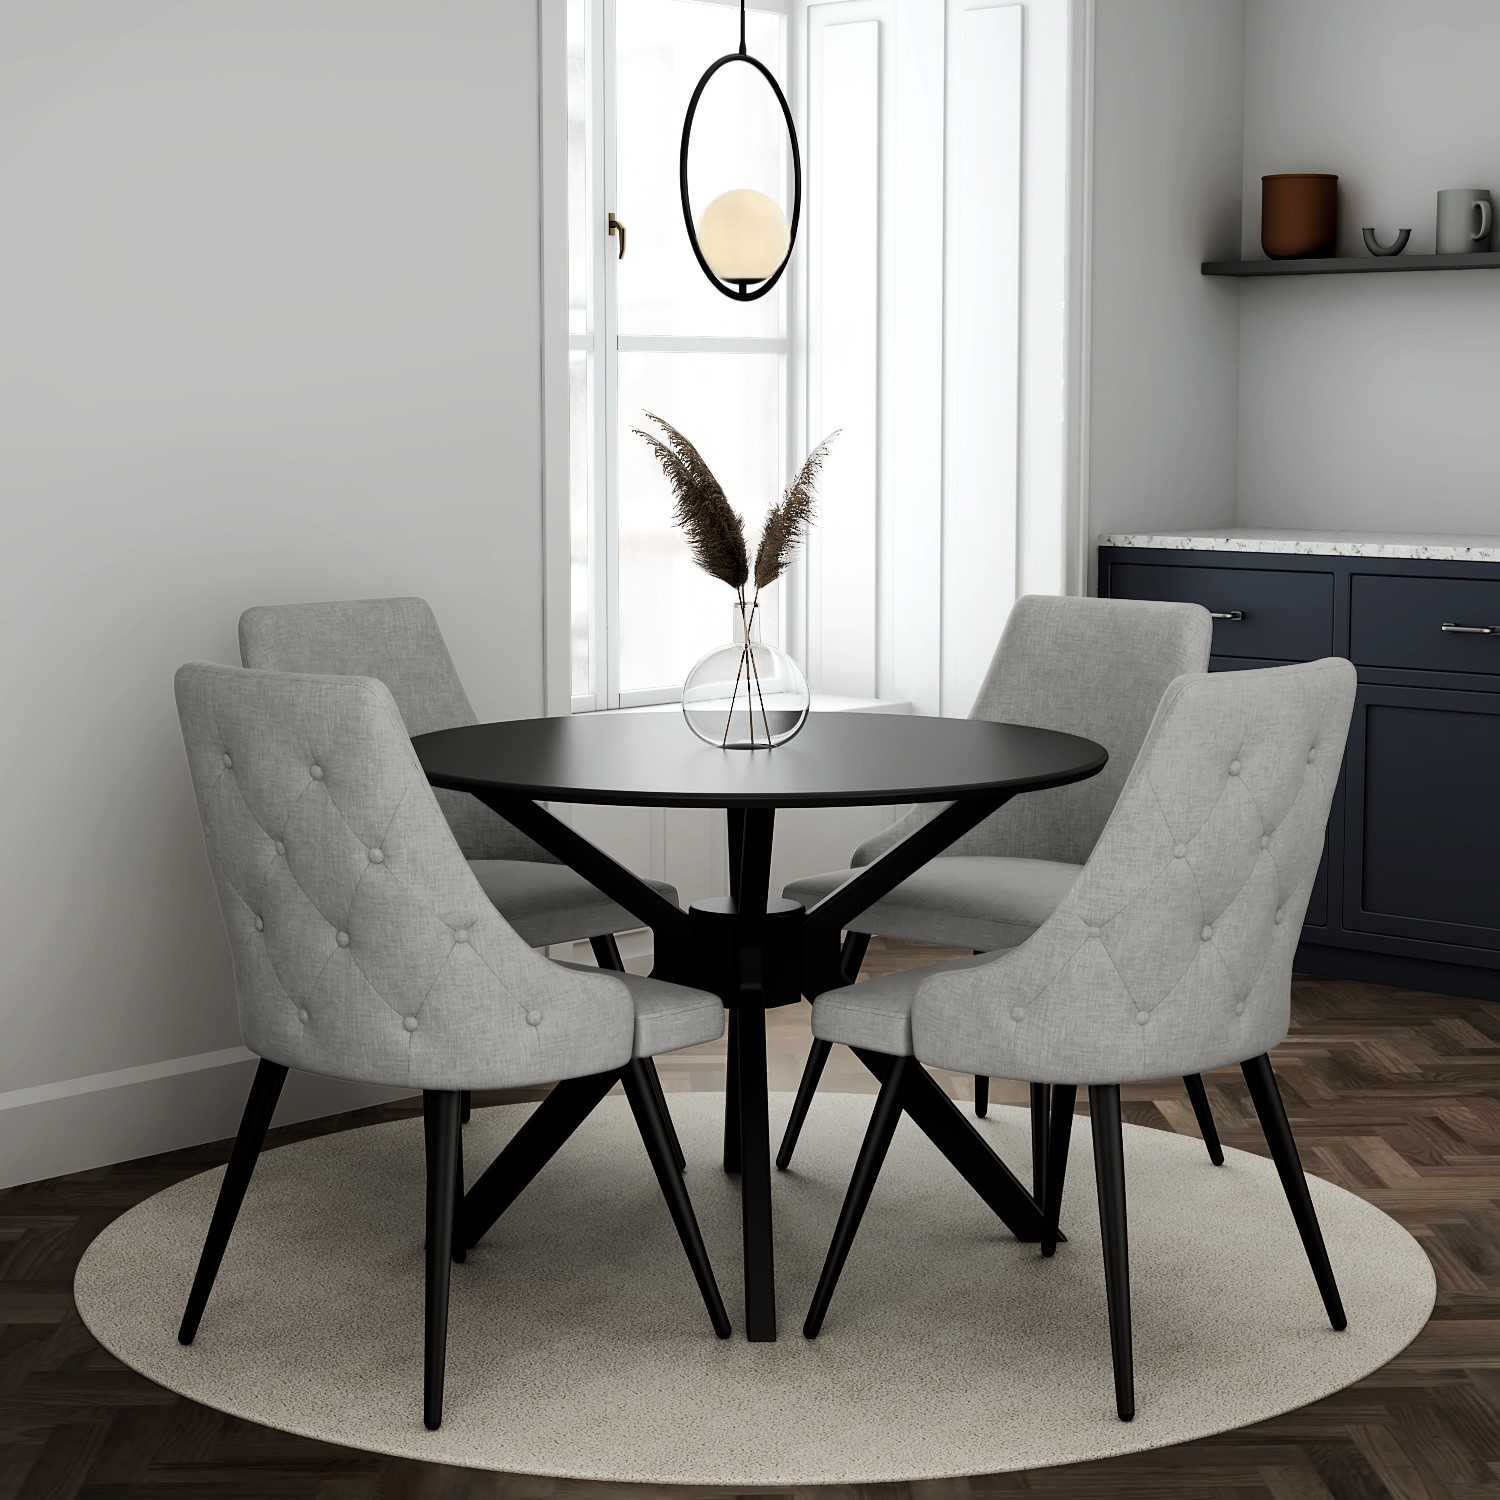 Black Round Dining Table With 4 Grey, Black Round Pedestal Table And Chairs